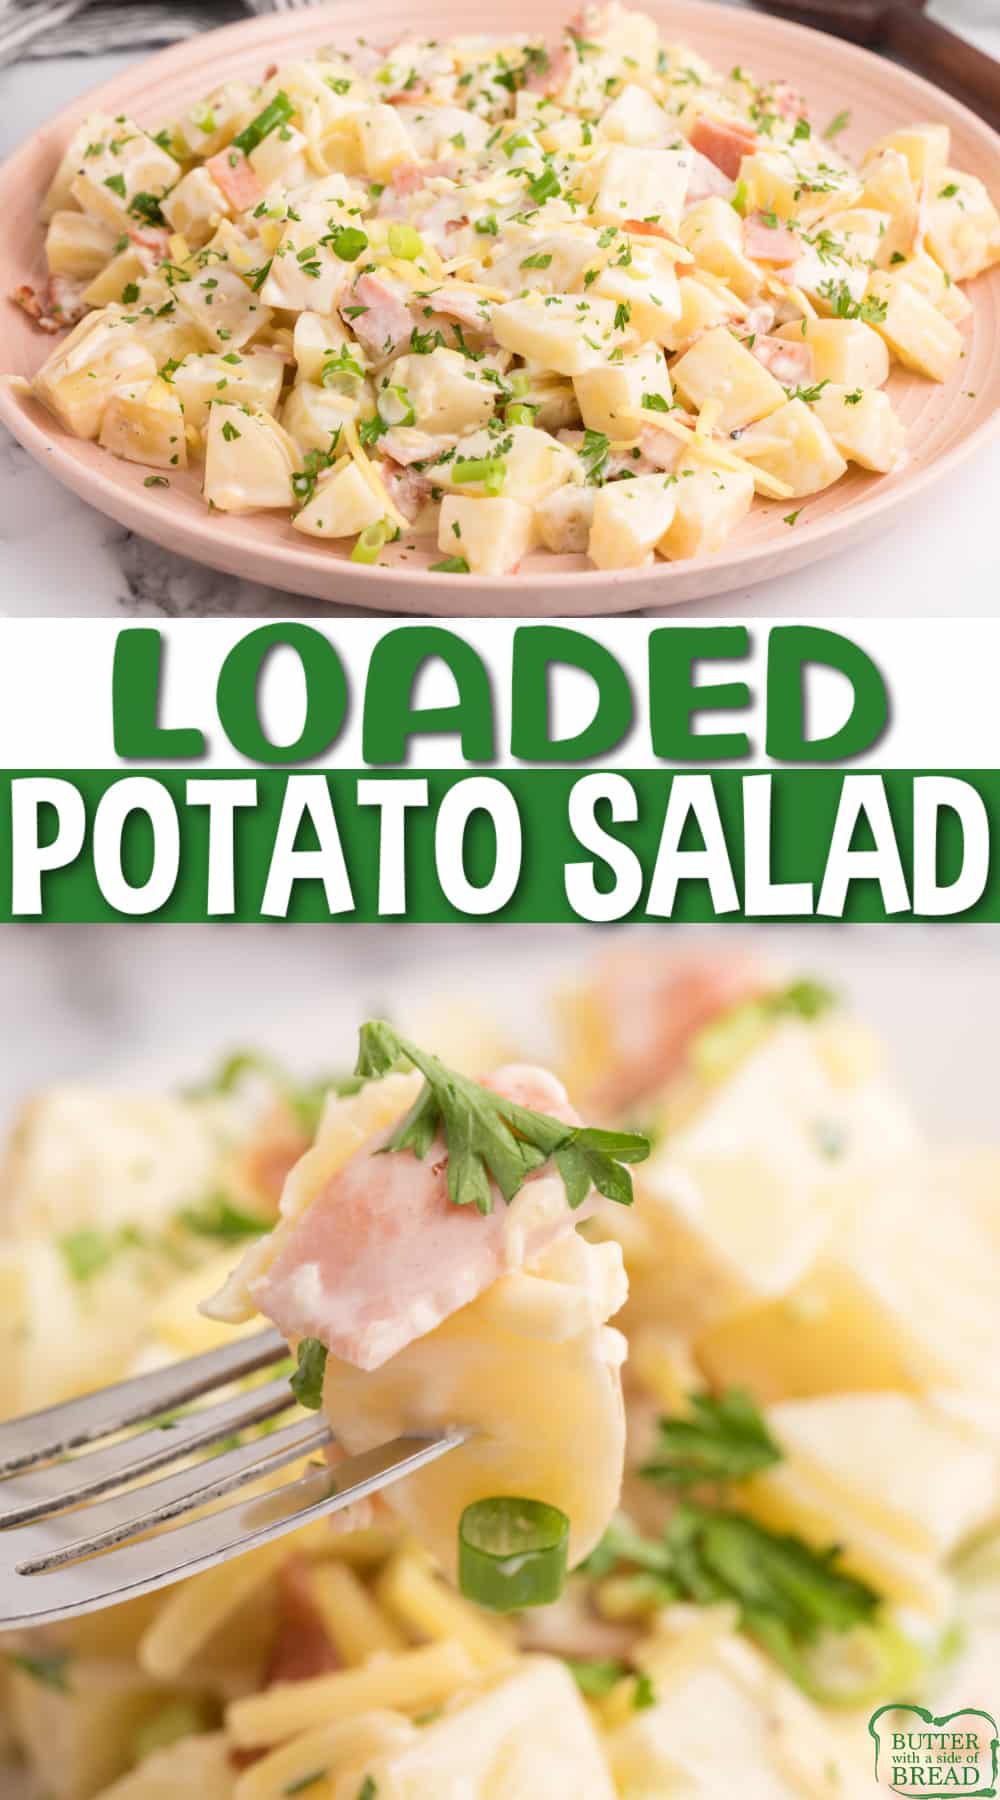 Loaded Potato Salad is made with potatoes, bacon, cheese and a simple dressing. Easy side dish recipe for parties and potlucks!